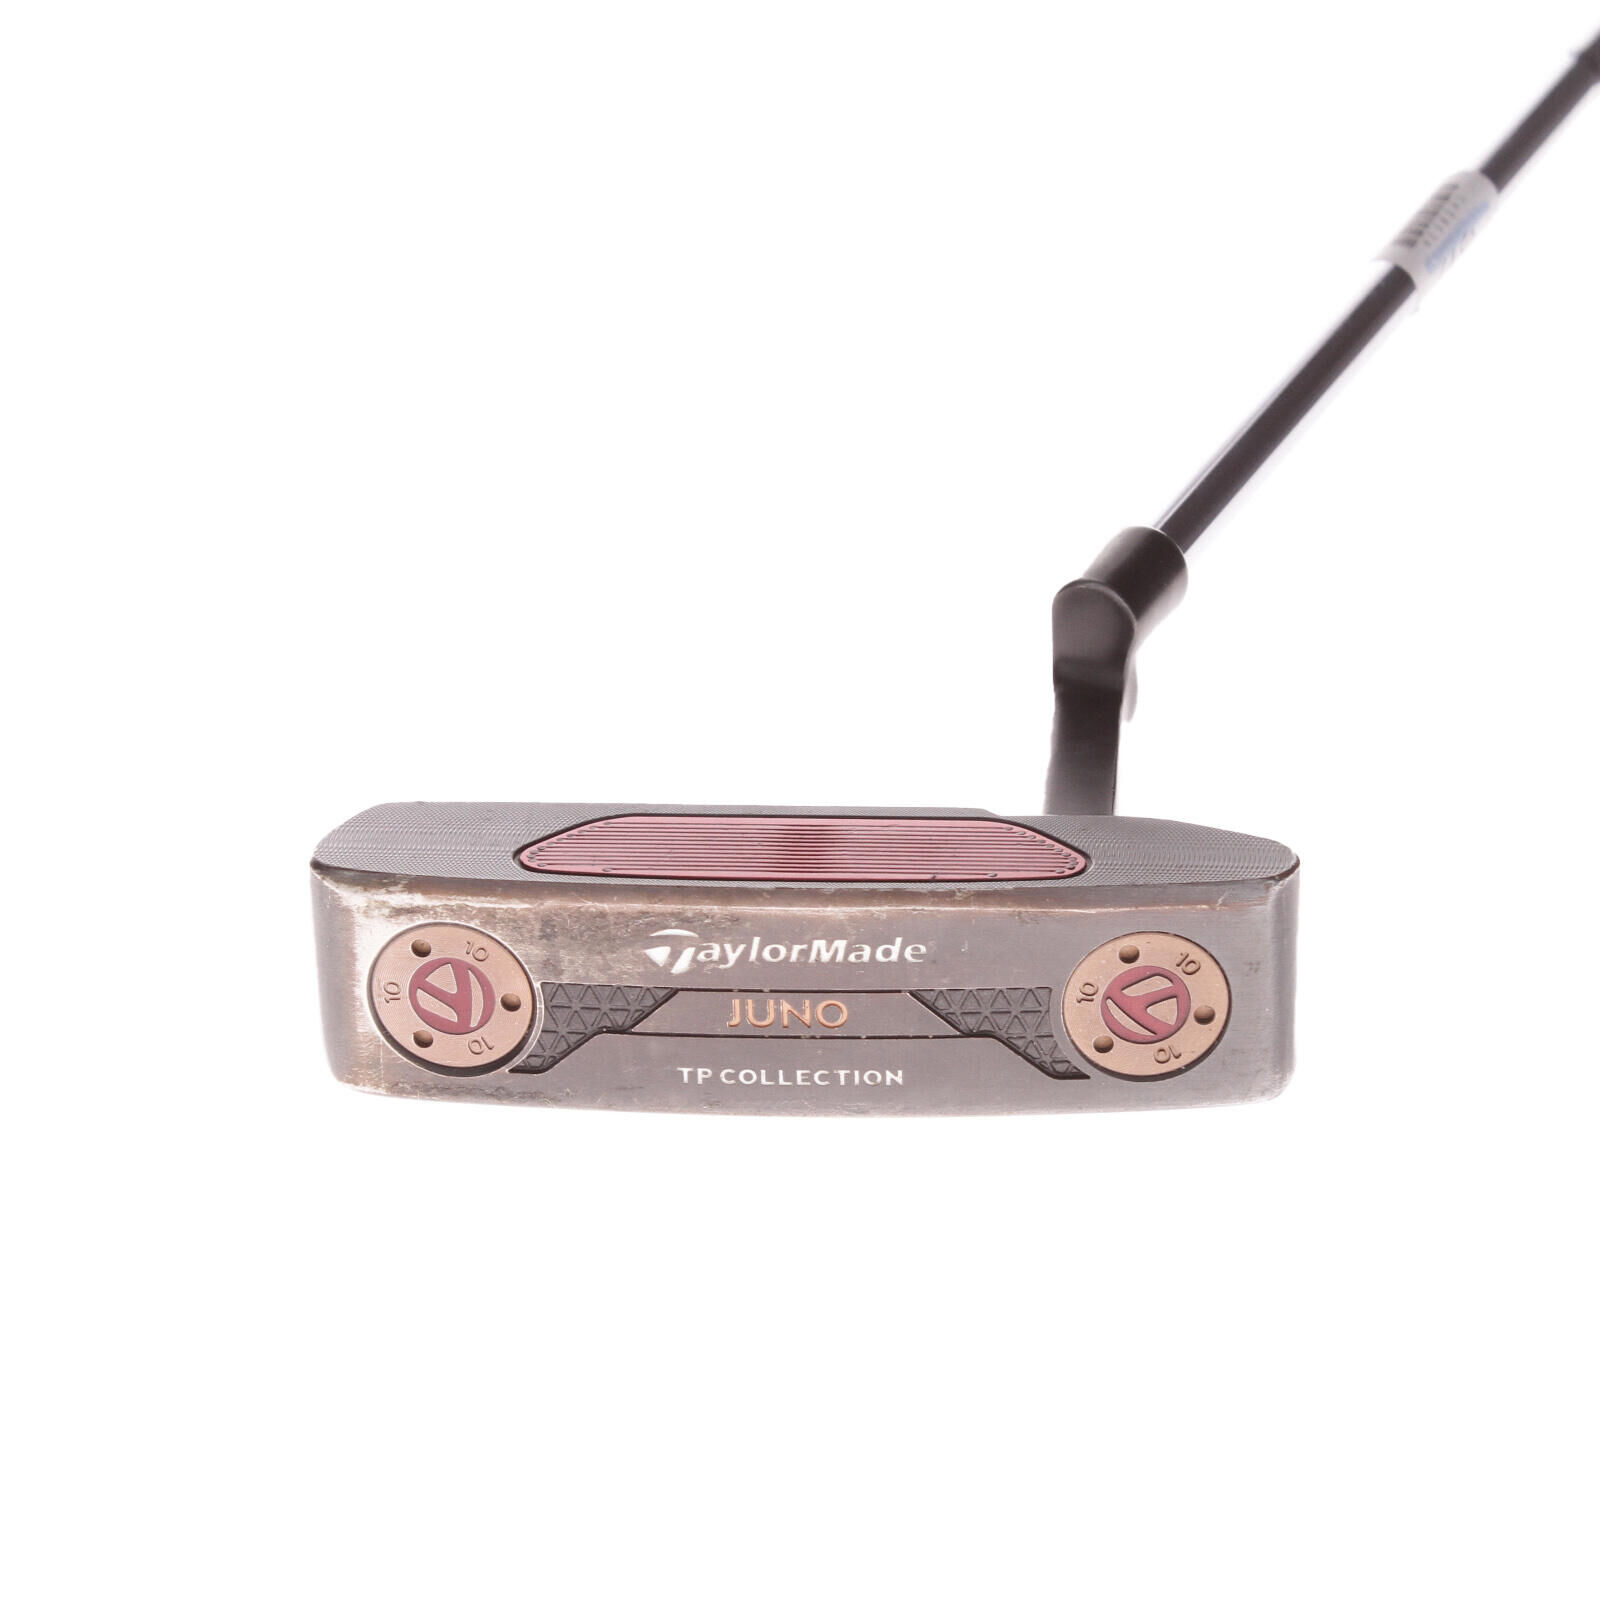 TAYLORMADE USED - TaylorMade Juno TP Collection Putter 33" Steel Shaft Right Hand - GRADE B